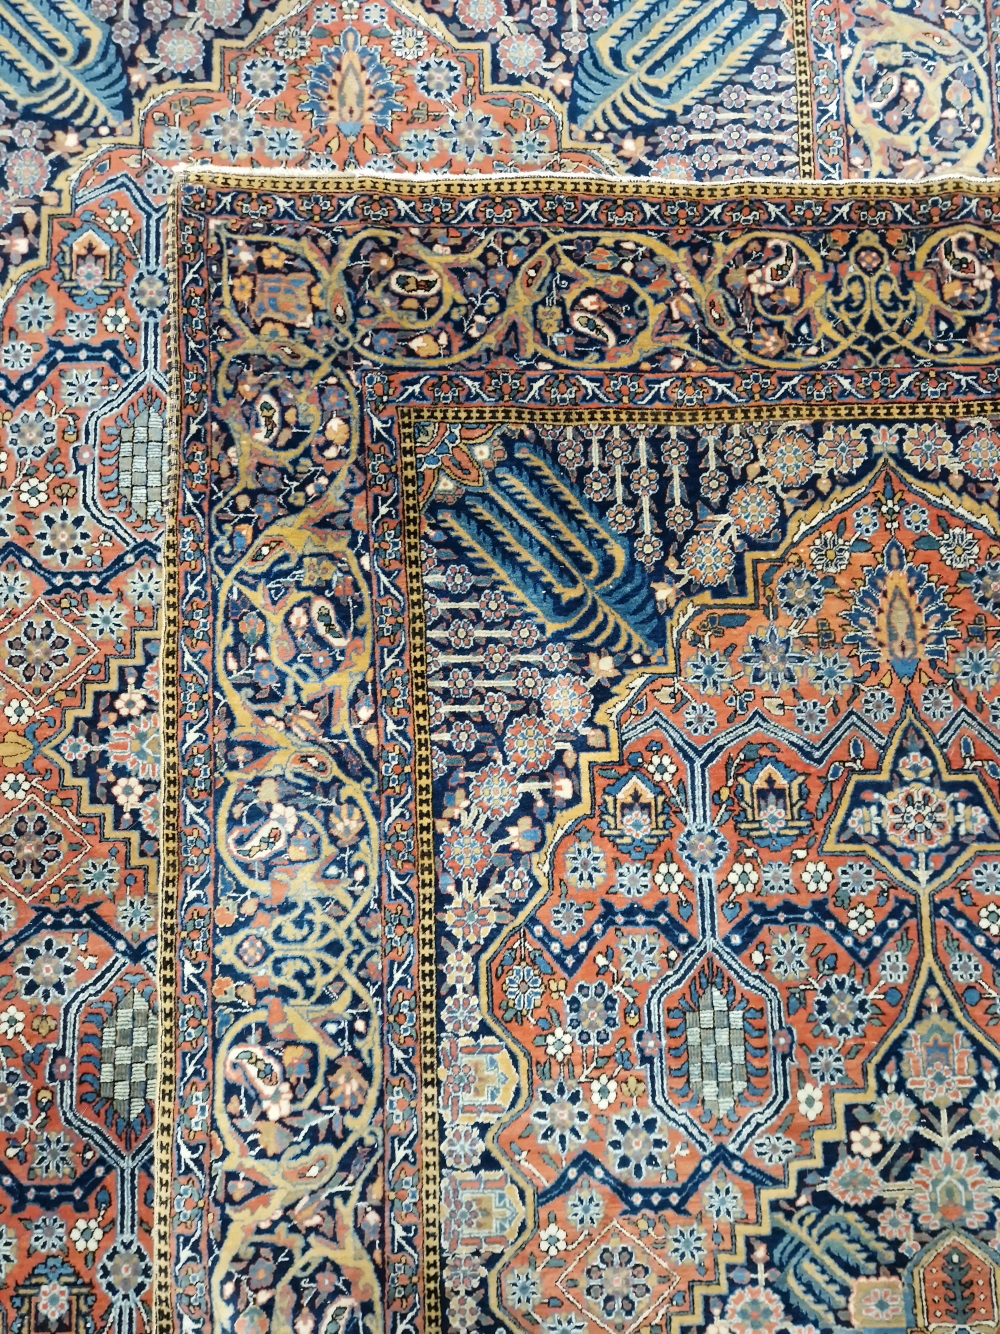 A PAIR OF ANTIQUE PERSIAN KASHAN RUGS. 298 x 132cms - Image 7 of 12